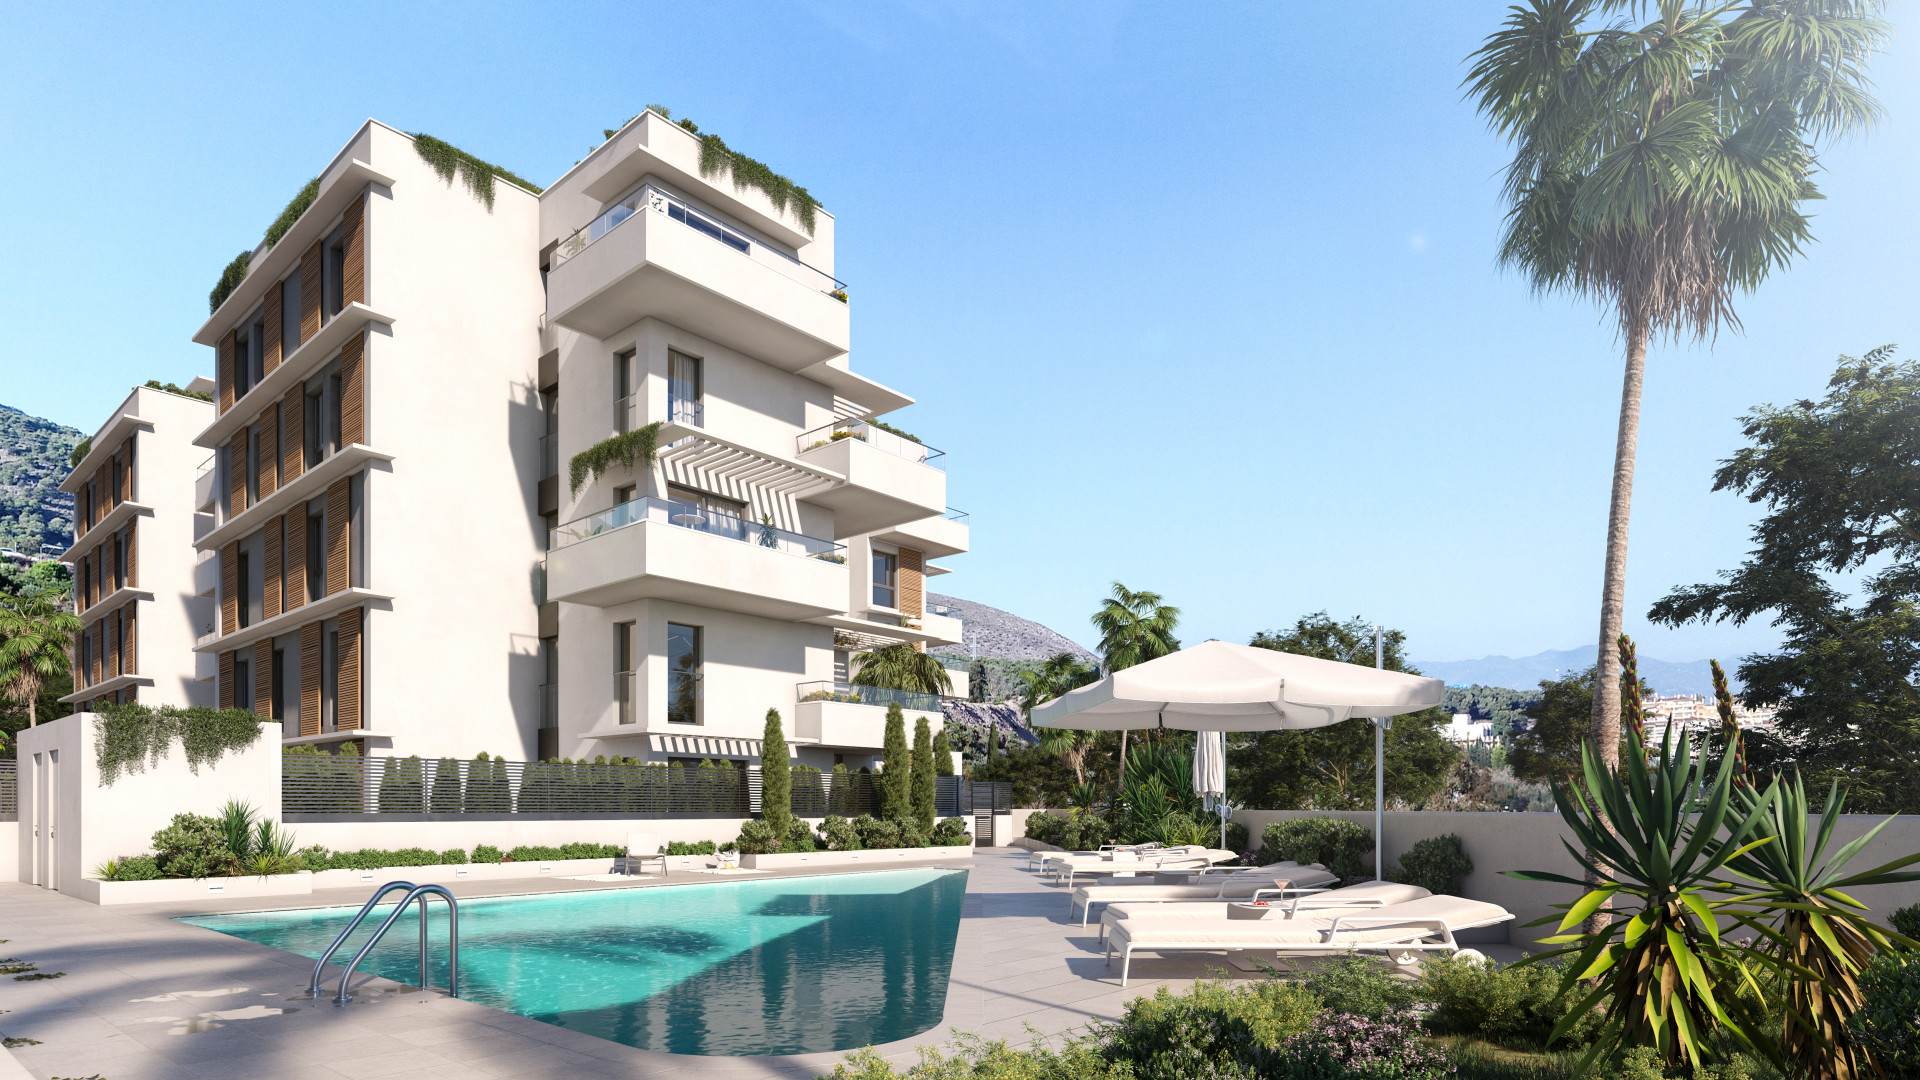 Three bedroom flat with large terrace and sea views in Torremolinos. | Image 1